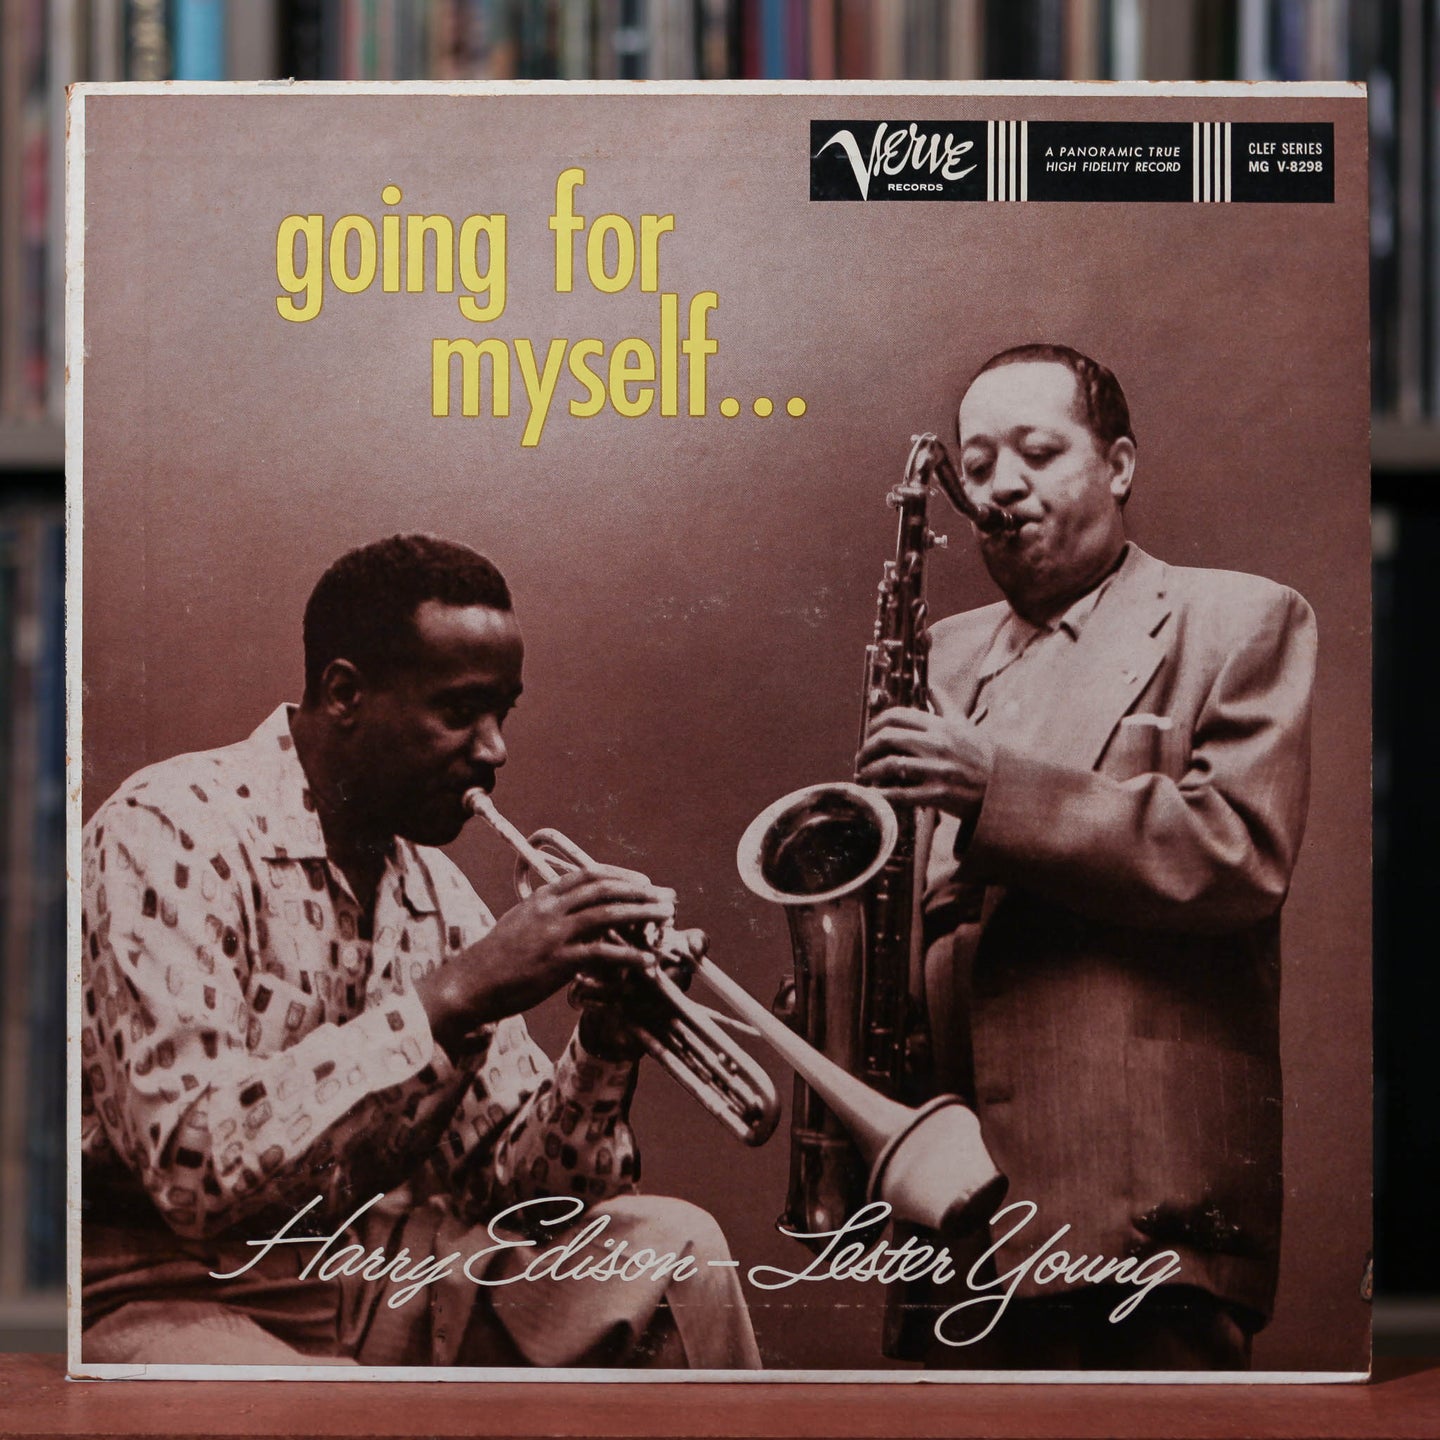 Harry Edison - Lester Young - Going for Myself - 1958 Verve, VG+/EX